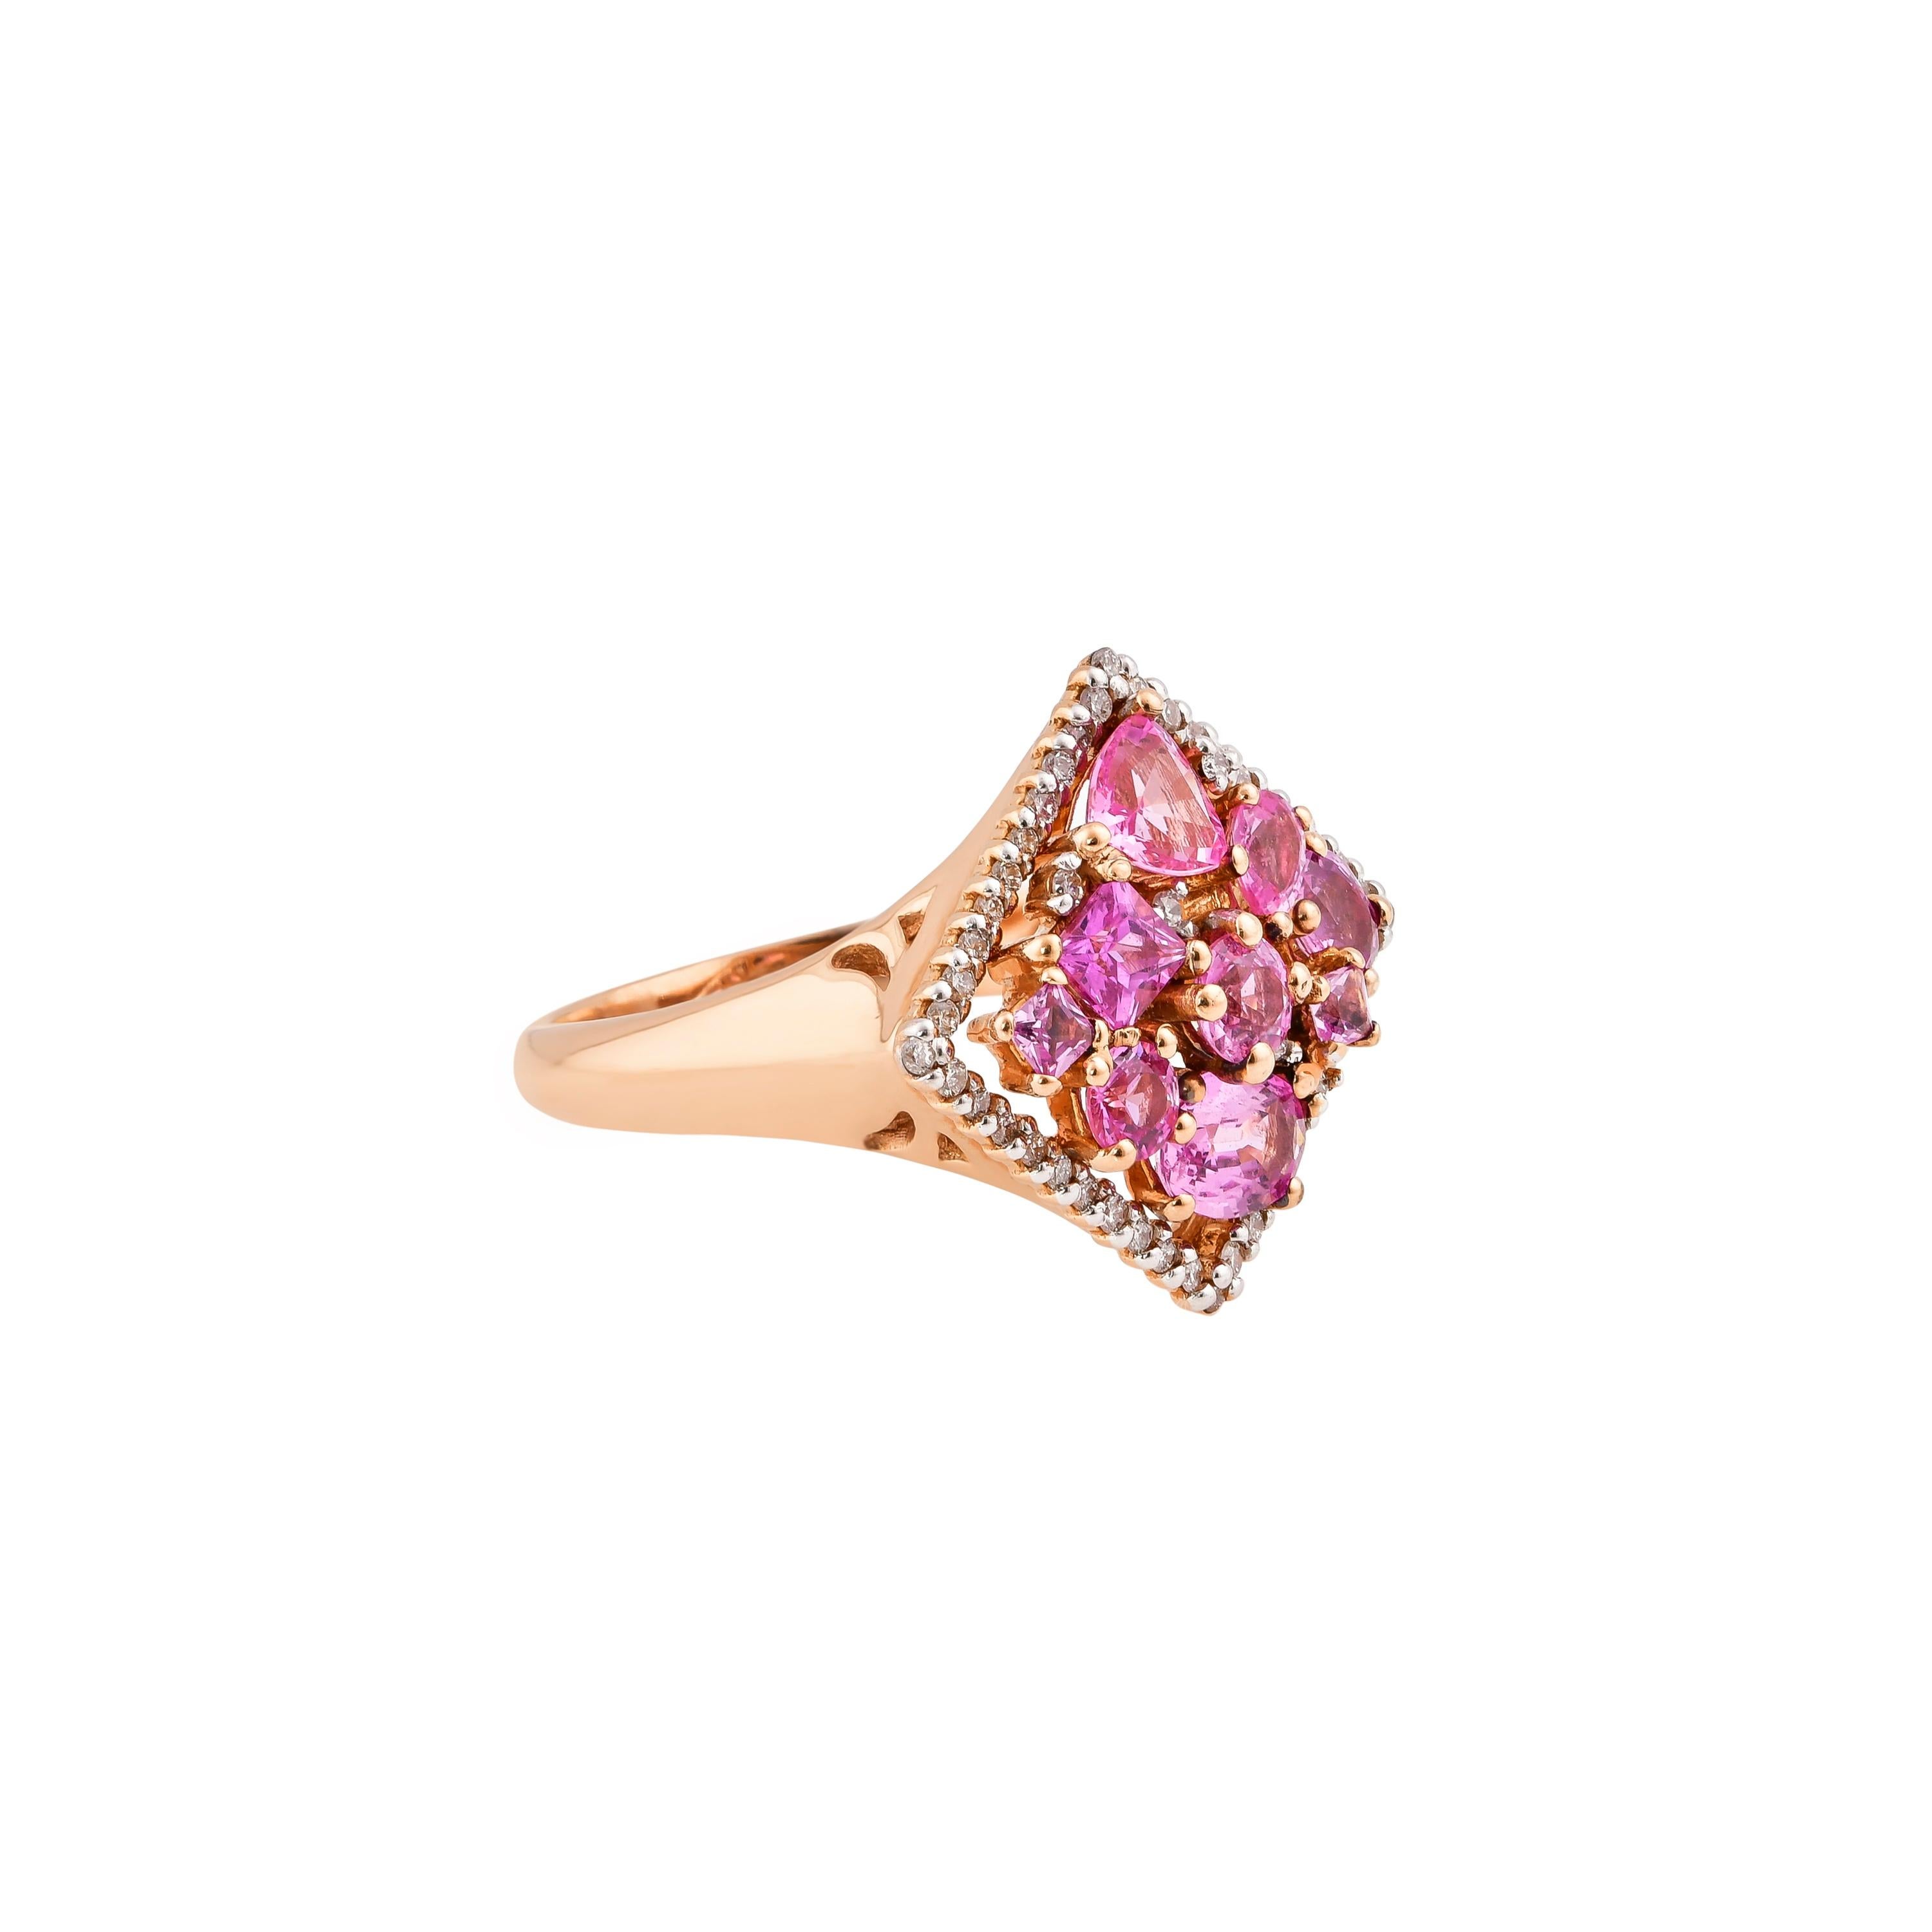 Contemporary 1.9 Carat Pink Sapphire Ring with Diamond in 18 Karat Rose Gold For Sale